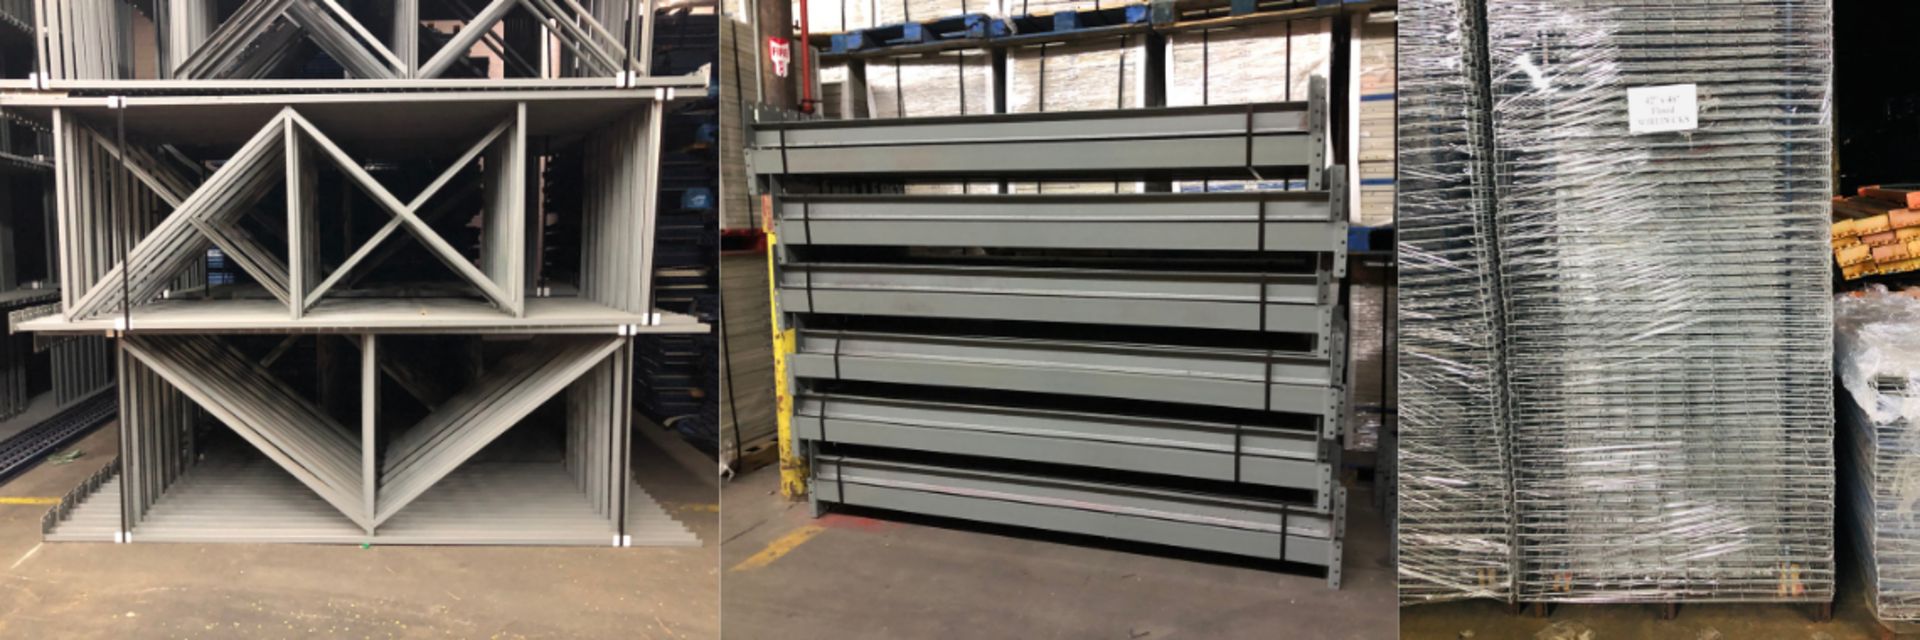 9 BAYS OF 10.5'H X 42"D X 93"L STRUCTURAL STYLE PALLET RACKS - Image 3 of 6